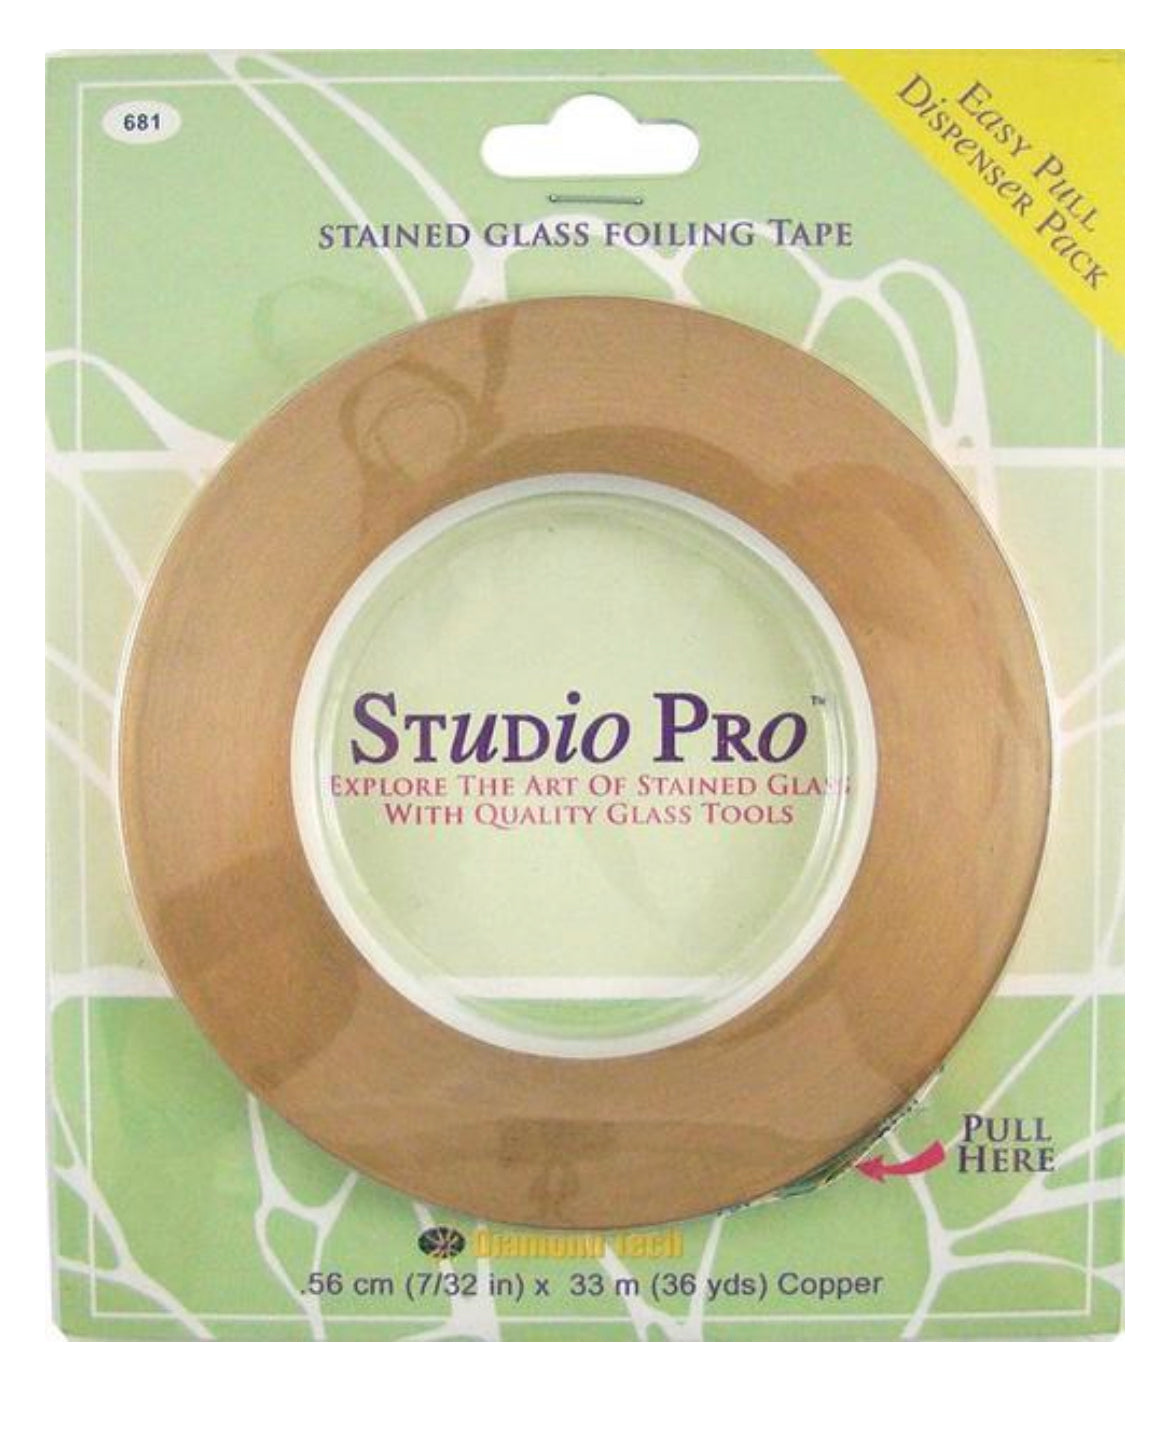 7/32” Copper Foil for Stained Glass - Copper Backed - Easy to Use Dispenser - Stained Glass Tools - Supplies - Copper Foil Method